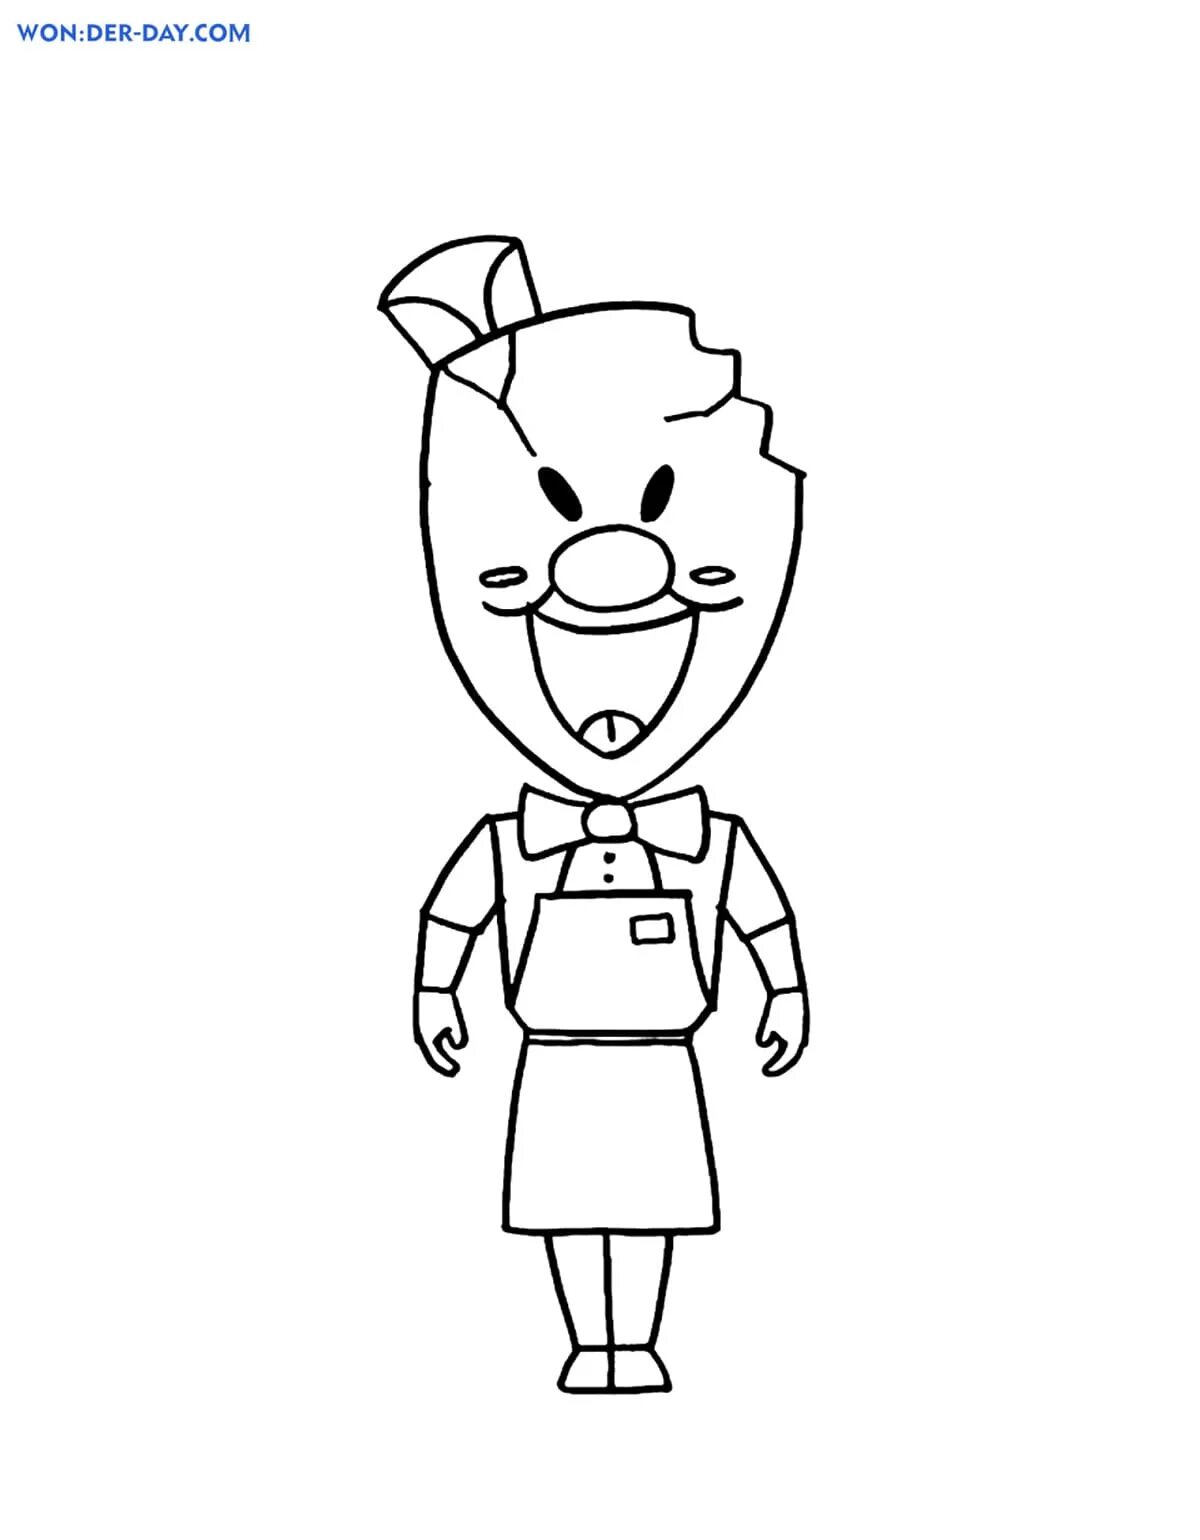 Color-frenzy ice cream mask coloring page